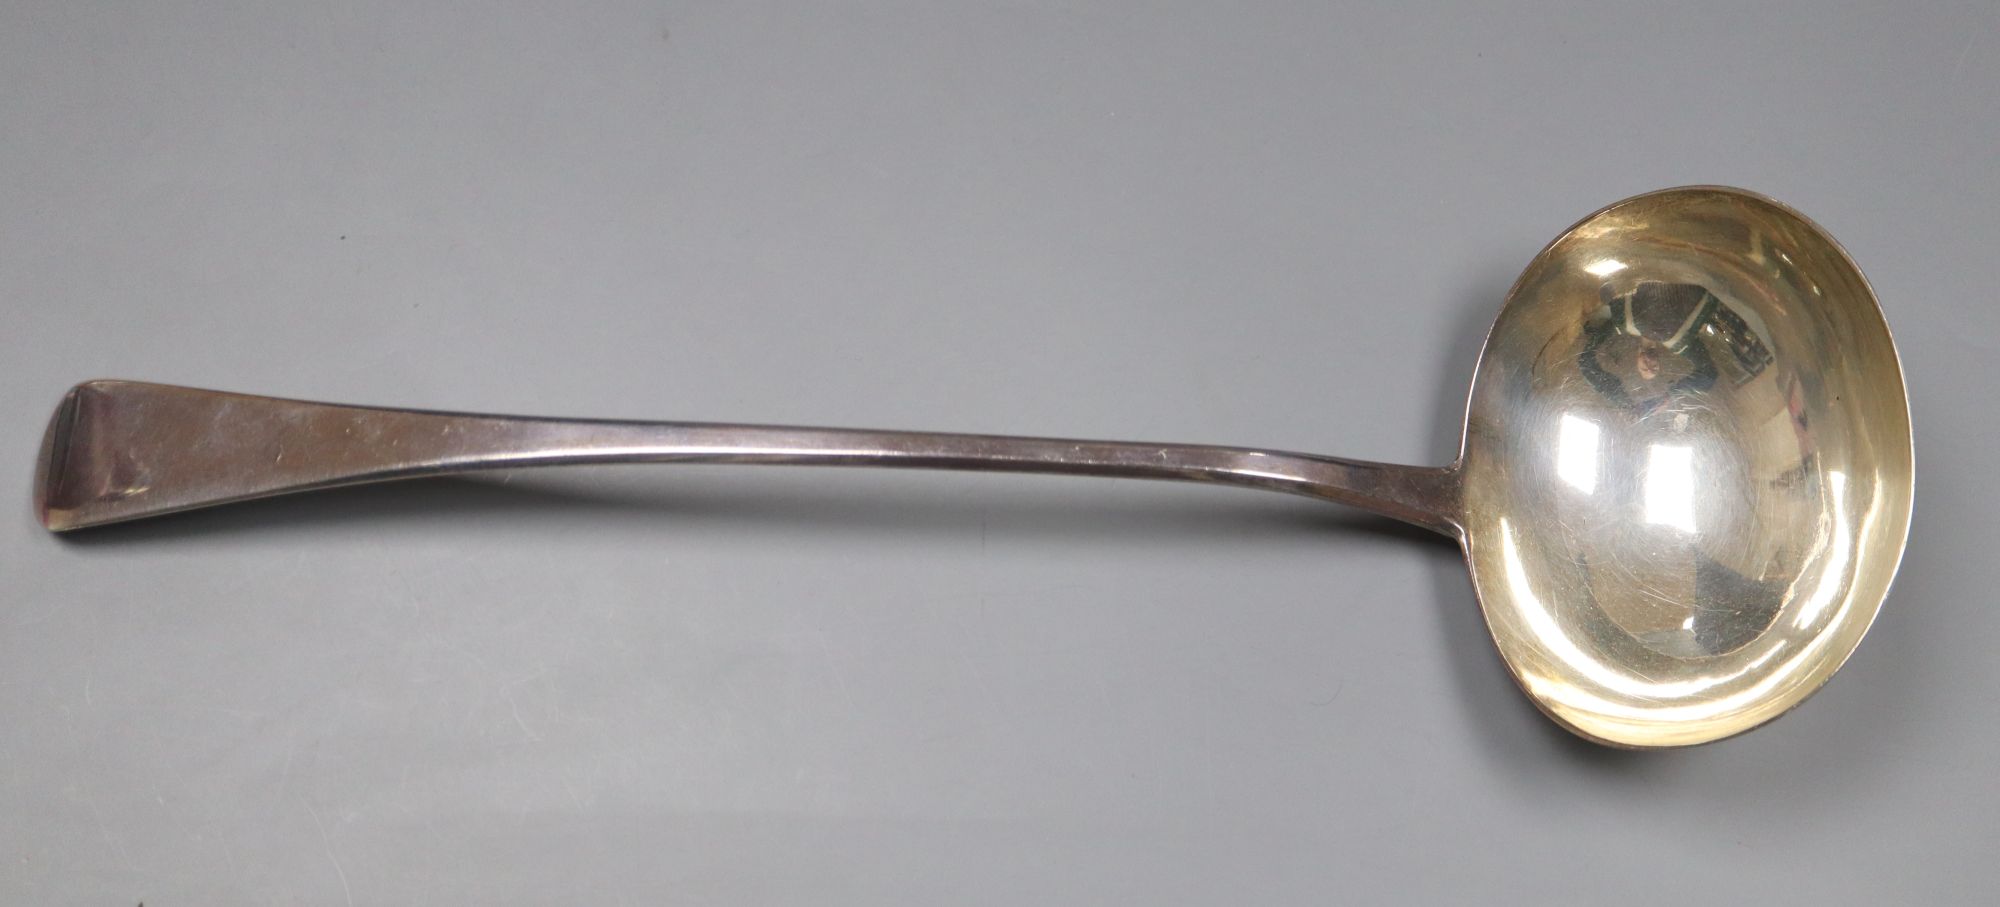 A George III silver Old English pattern soup ladle, Soloman Hougham, London, 1813, 34cm, 178 grams.